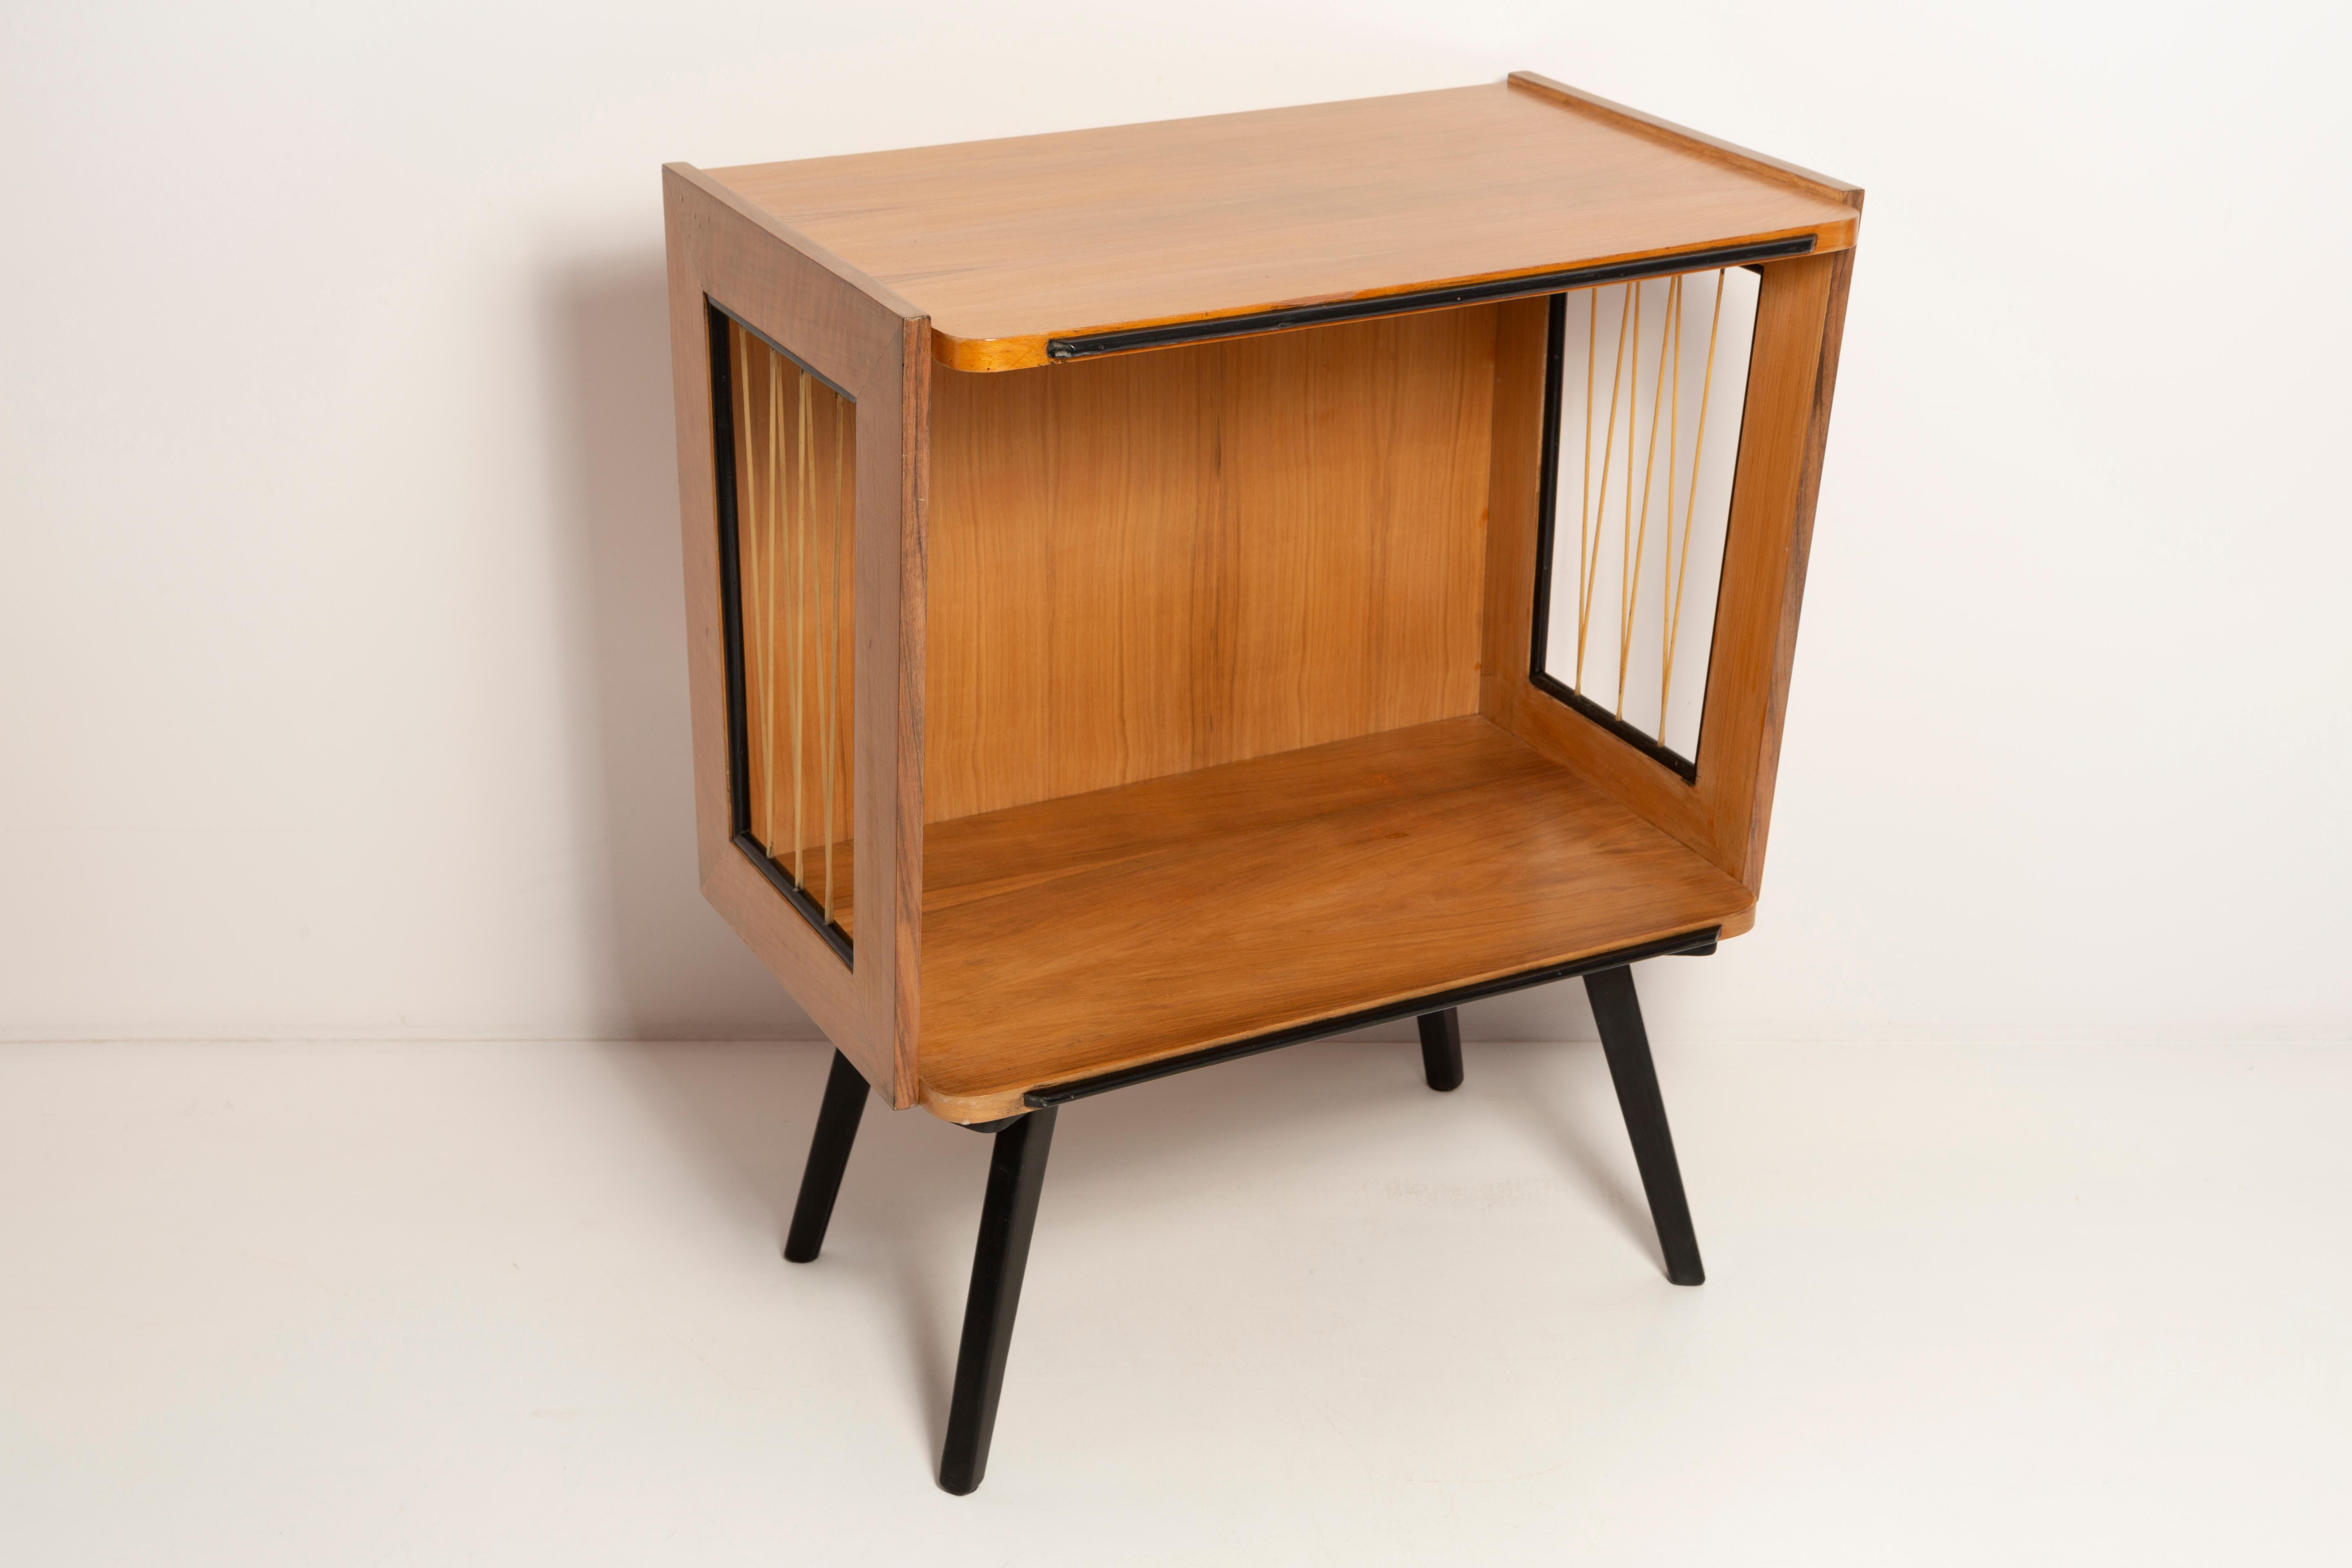 Hand-Painted Mid-Century Modern Vintage TV Side Table, Beechwood, Poland, 1960s For Sale